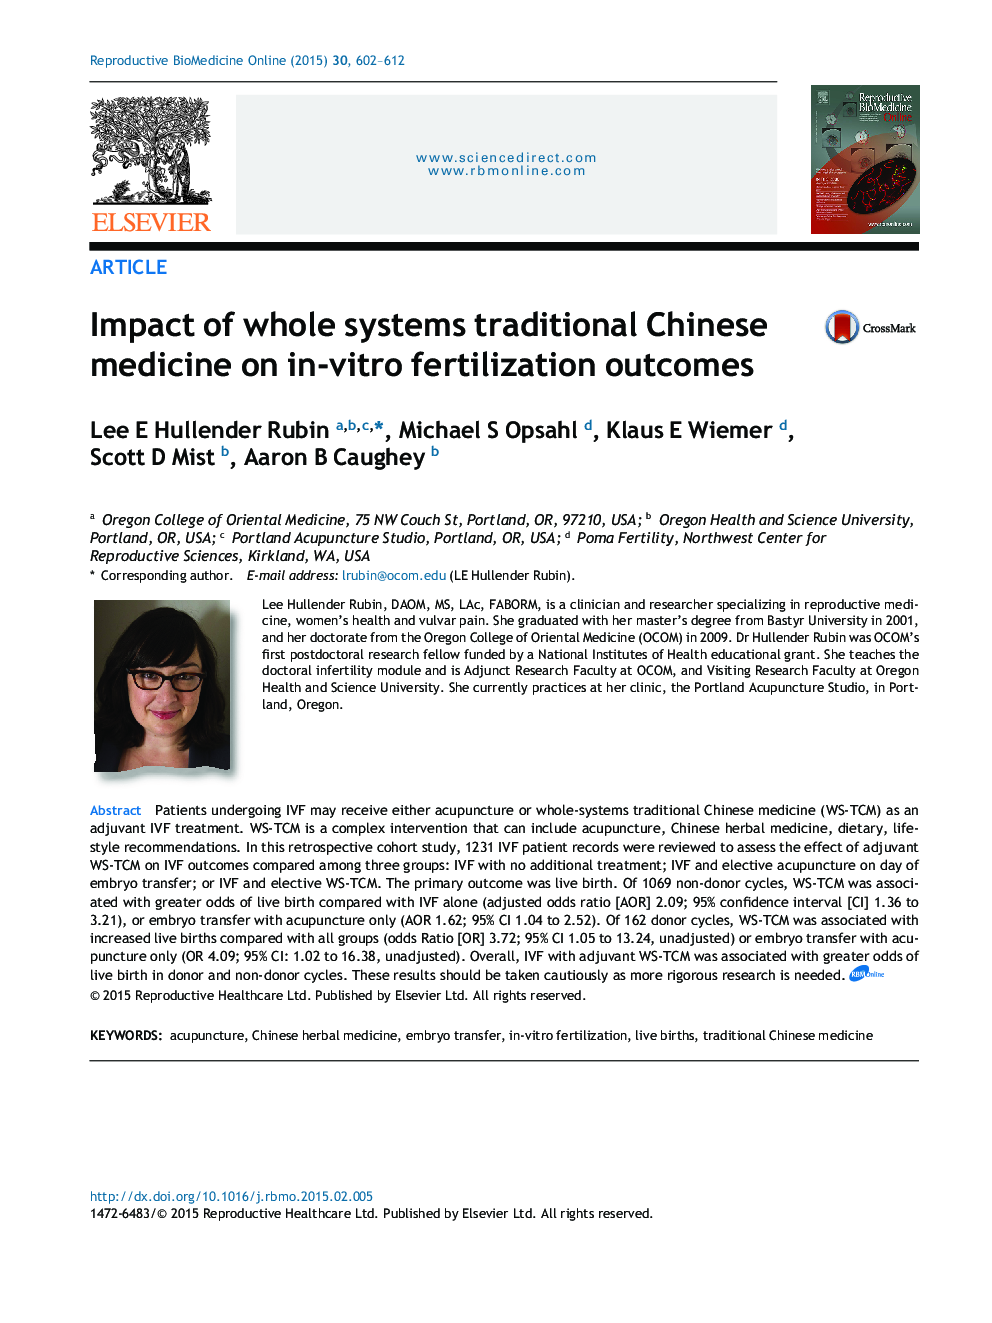 Impact of whole systems traditional Chinese medicine on in-vitro fertilization outcomes